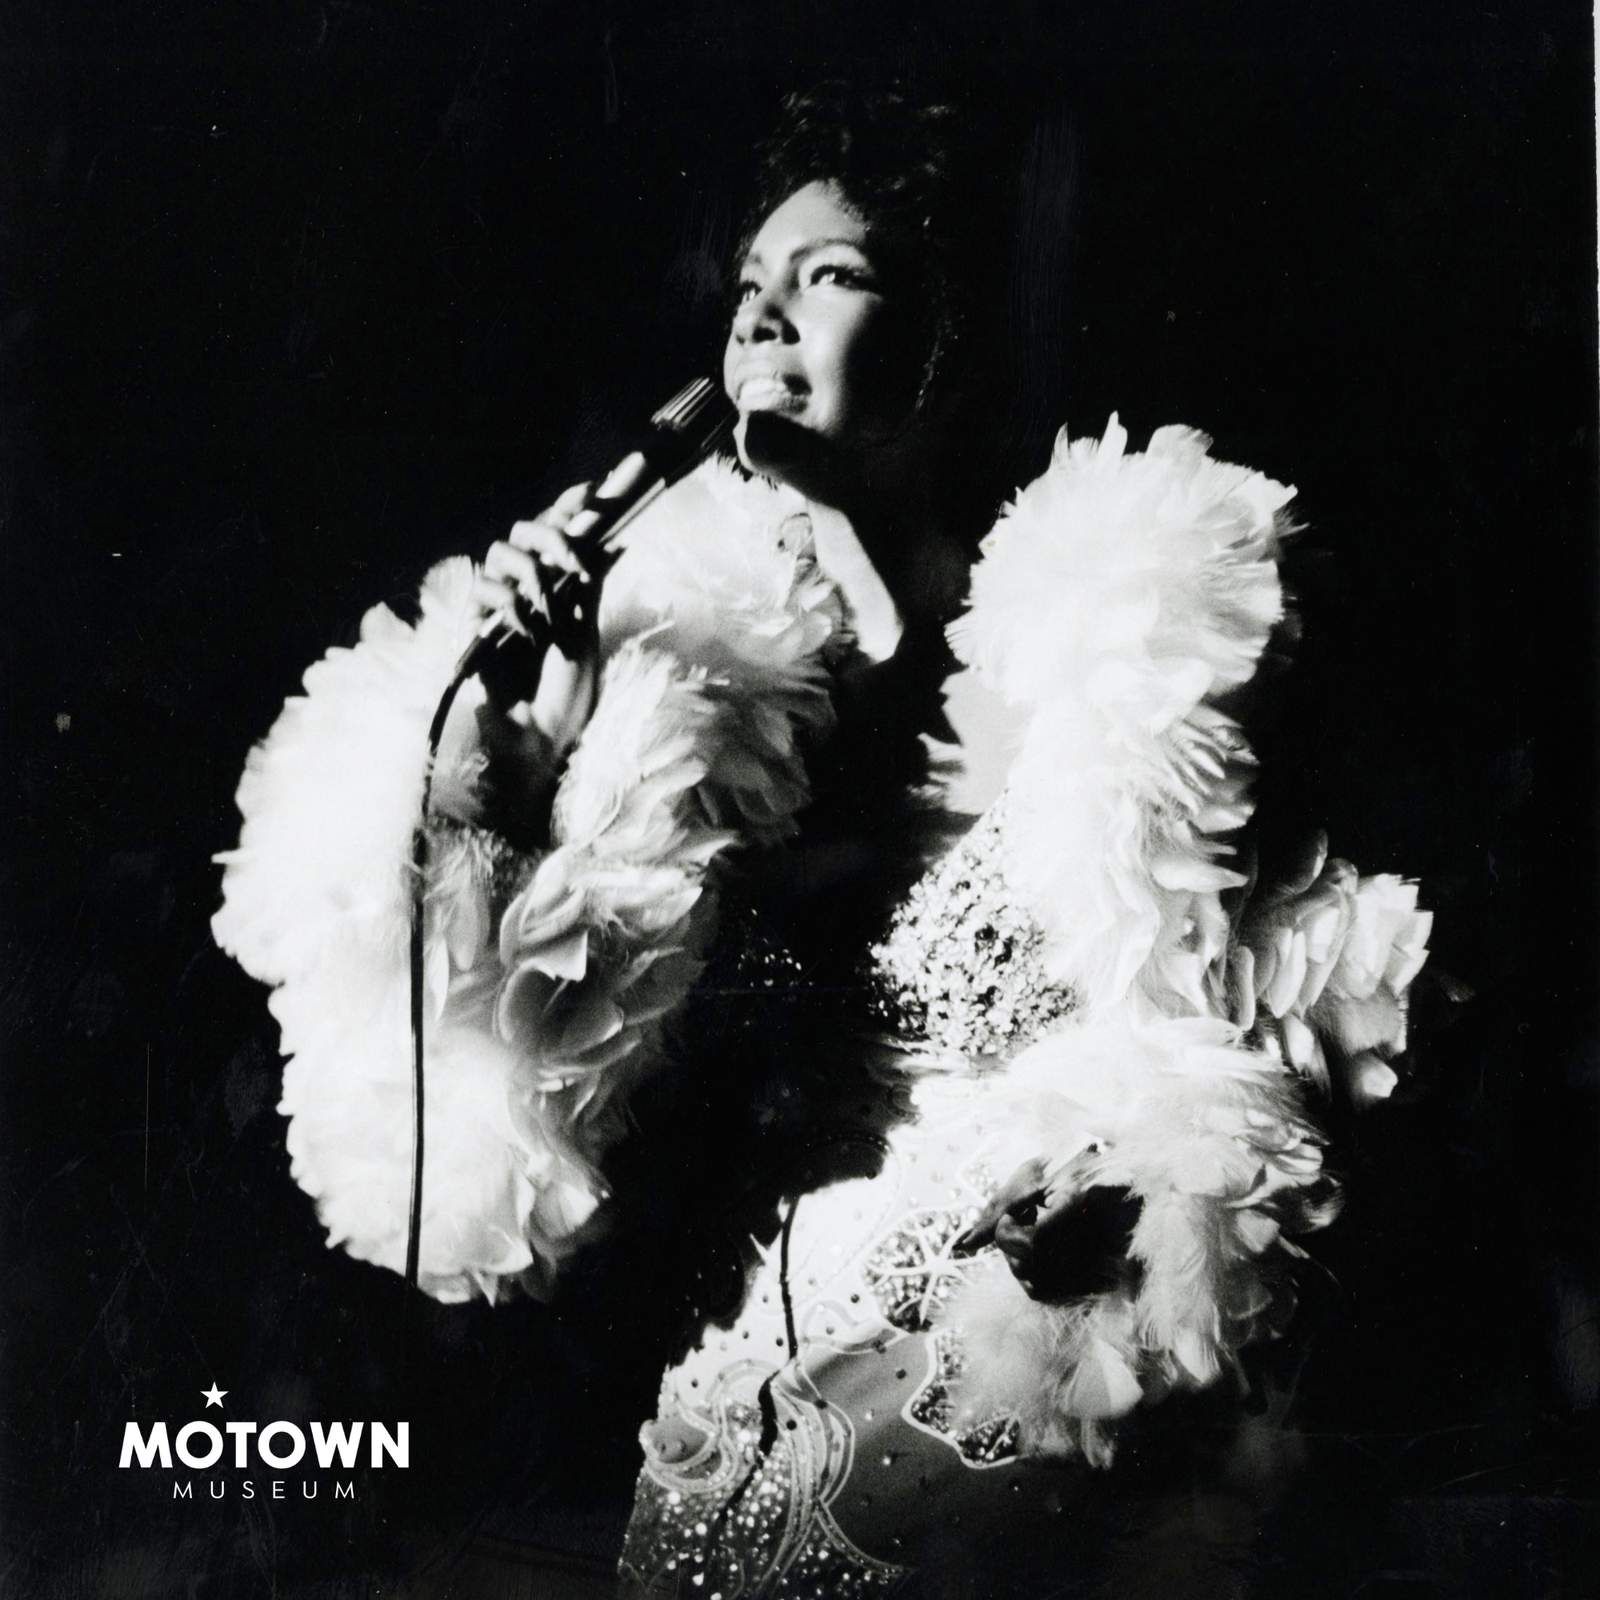 Motown Museum chair on Mary Wilson: ’World has lost one of the brightest stars in our family’